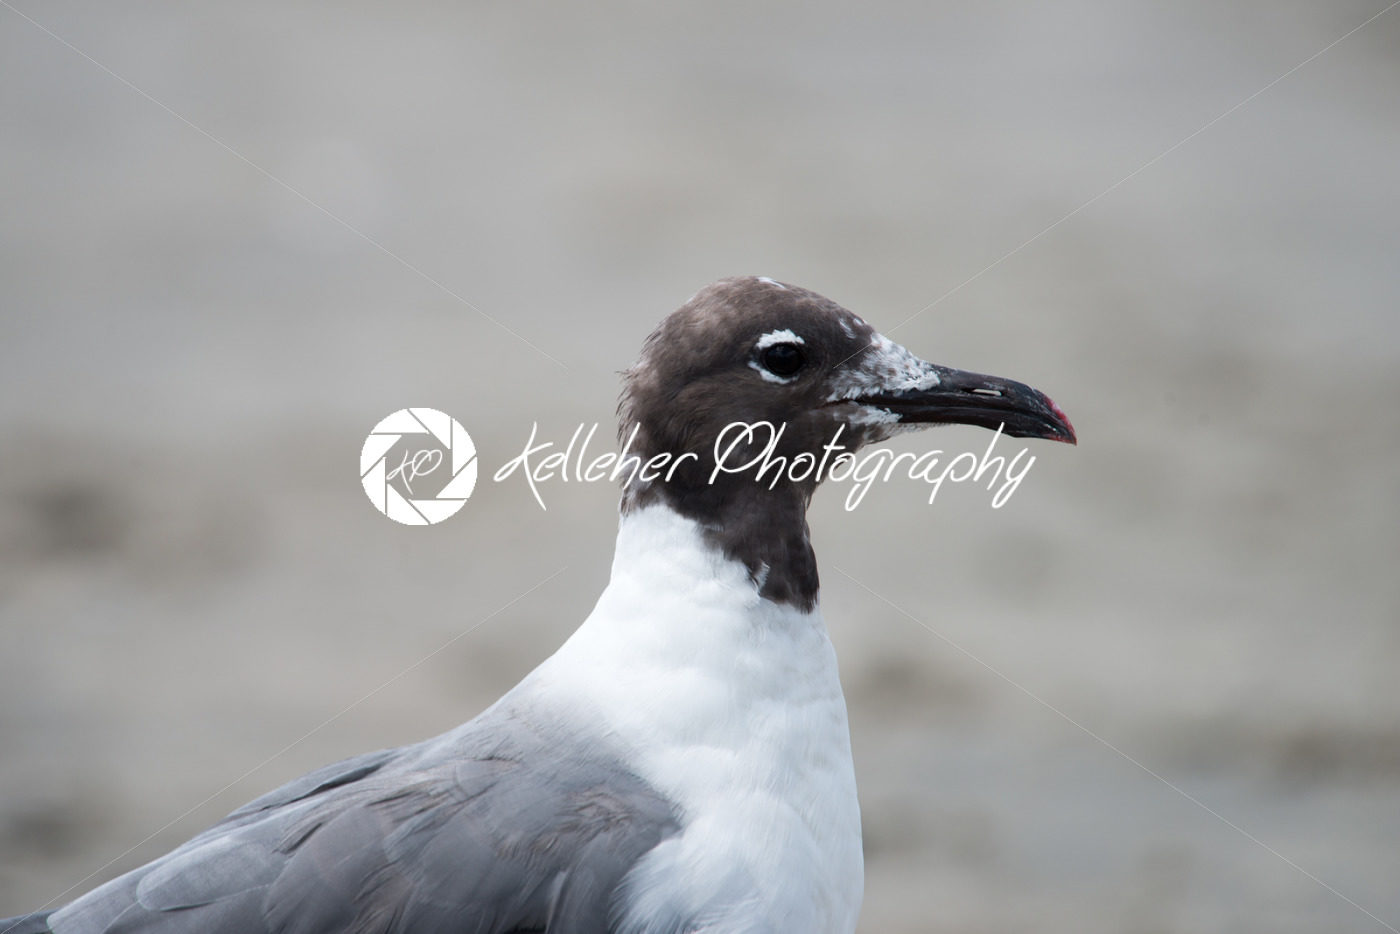 Closeup view of a Seagull on Beach - Kelleher Photography Store